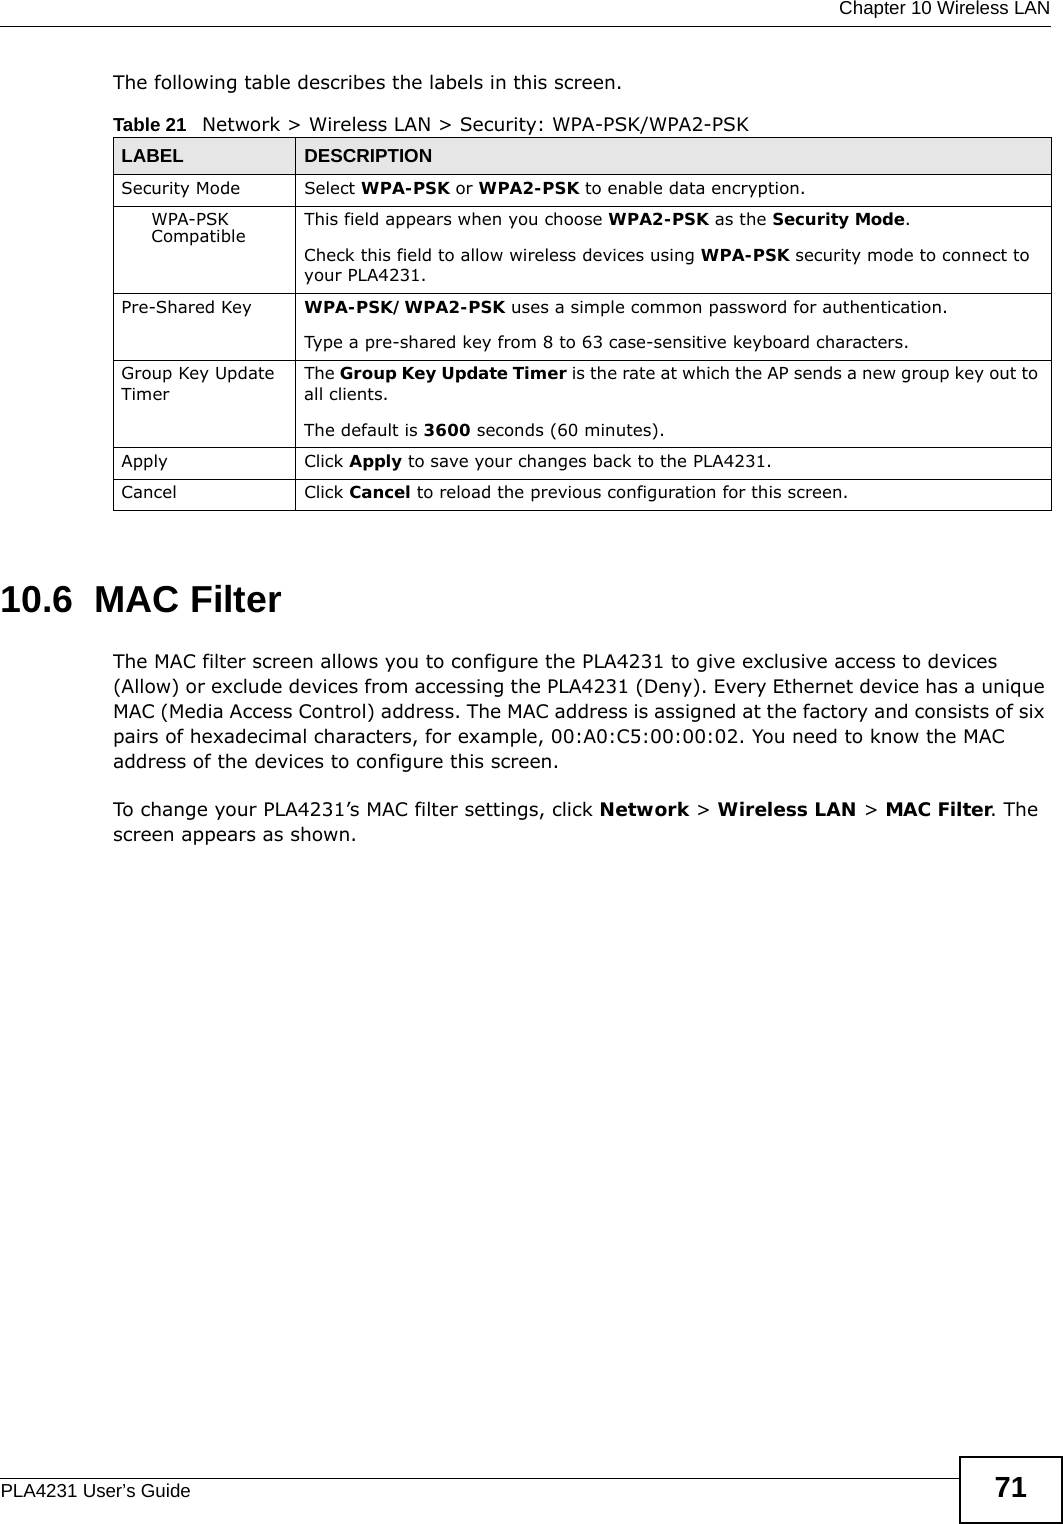  Chapter 10 Wireless LANPLA4231 User’s Guide 71The following table describes the labels in this screen.10.6  MAC FilterThe MAC filter screen allows you to configure the PLA4231 to give exclusive access to devices (Allow) or exclude devices from accessing the PLA4231 (Deny). Every Ethernet device has a unique MAC (Media Access Control) address. The MAC address is assigned at the factory and consists of six pairs of hexadecimal characters, for example, 00:A0:C5:00:00:02. You need to know the MAC address of the devices to configure this screen.To change your PLA4231’s MAC filter settings, click Network &gt; Wireless LAN &gt; MAC Filter. The screen appears as shown.Table 21   Network &gt; Wireless LAN &gt; Security: WPA-PSK/WPA2-PSKLABEL DESCRIPTIONSecurity Mode Select WPA-PSK or WPA2-PSK to enable data encryption.WPA-PSK Compatible This field appears when you choose WPA2-PSK as the Security Mode.Check this field to allow wireless devices using WPA-PSK security mode to connect to your PLA4231.Pre-Shared Key  WPA-PSK/WPA2-PSK uses a simple common password for authentication.Type a pre-shared key from 8 to 63 case-sensitive keyboard characters.Group Key Update TimerThe Group Key Update Timer is the rate at which the AP sends a new group key out to all clients. The default is 3600 seconds (60 minutes).Apply Click Apply to save your changes back to the PLA4231.Cancel Click Cancel to reload the previous configuration for this screen.